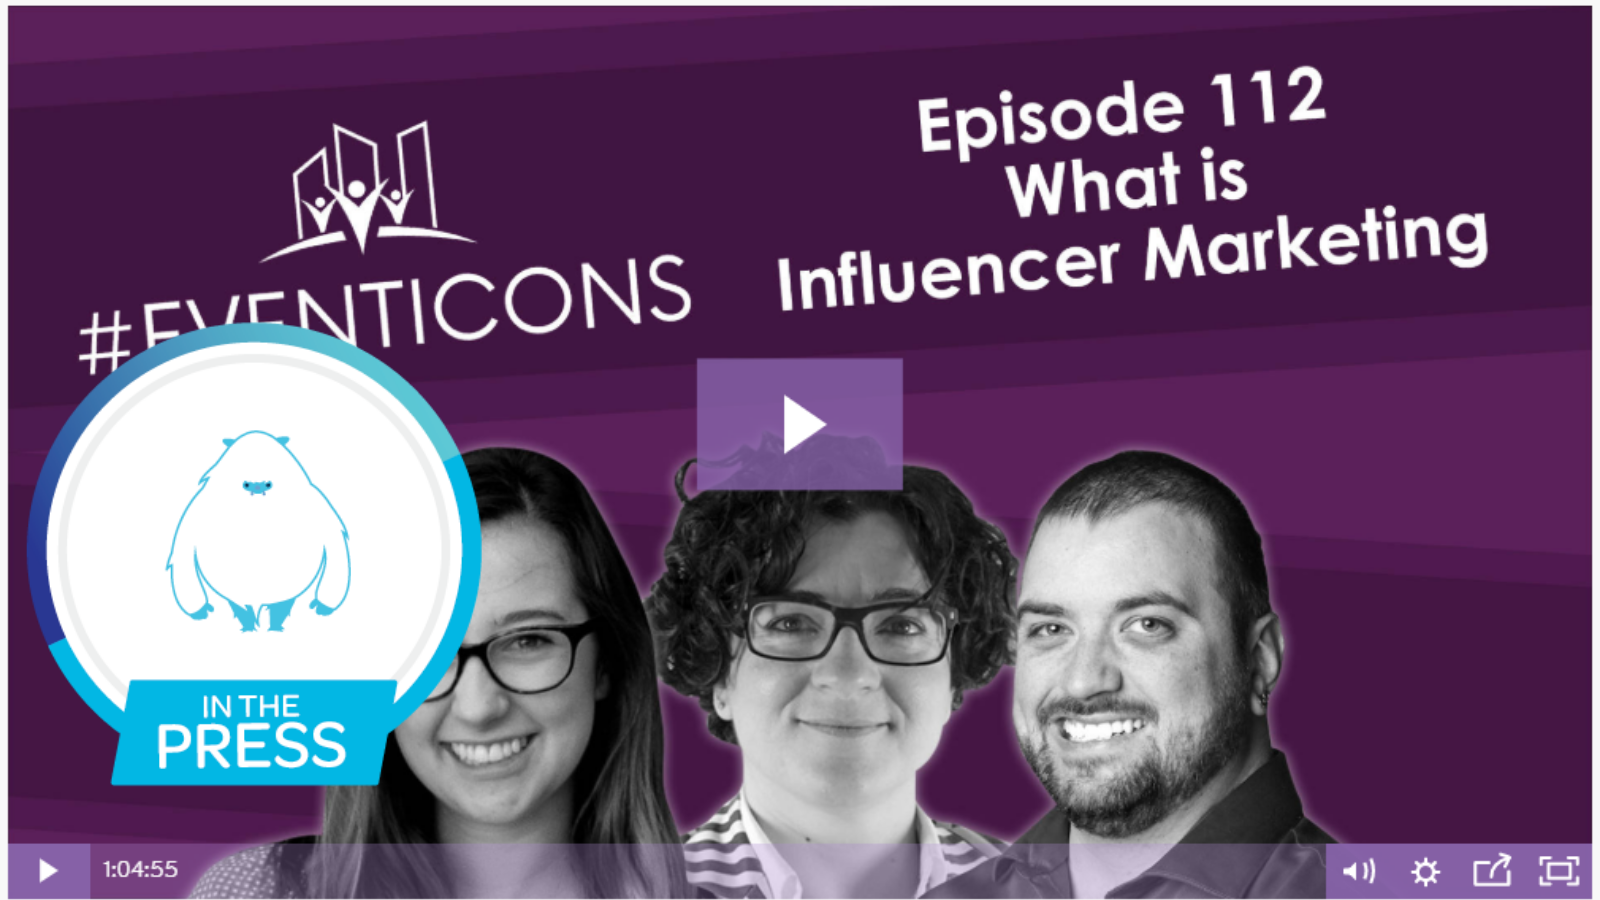 Influencer Marketing – #EventIcons Episode 112 by Endless Events